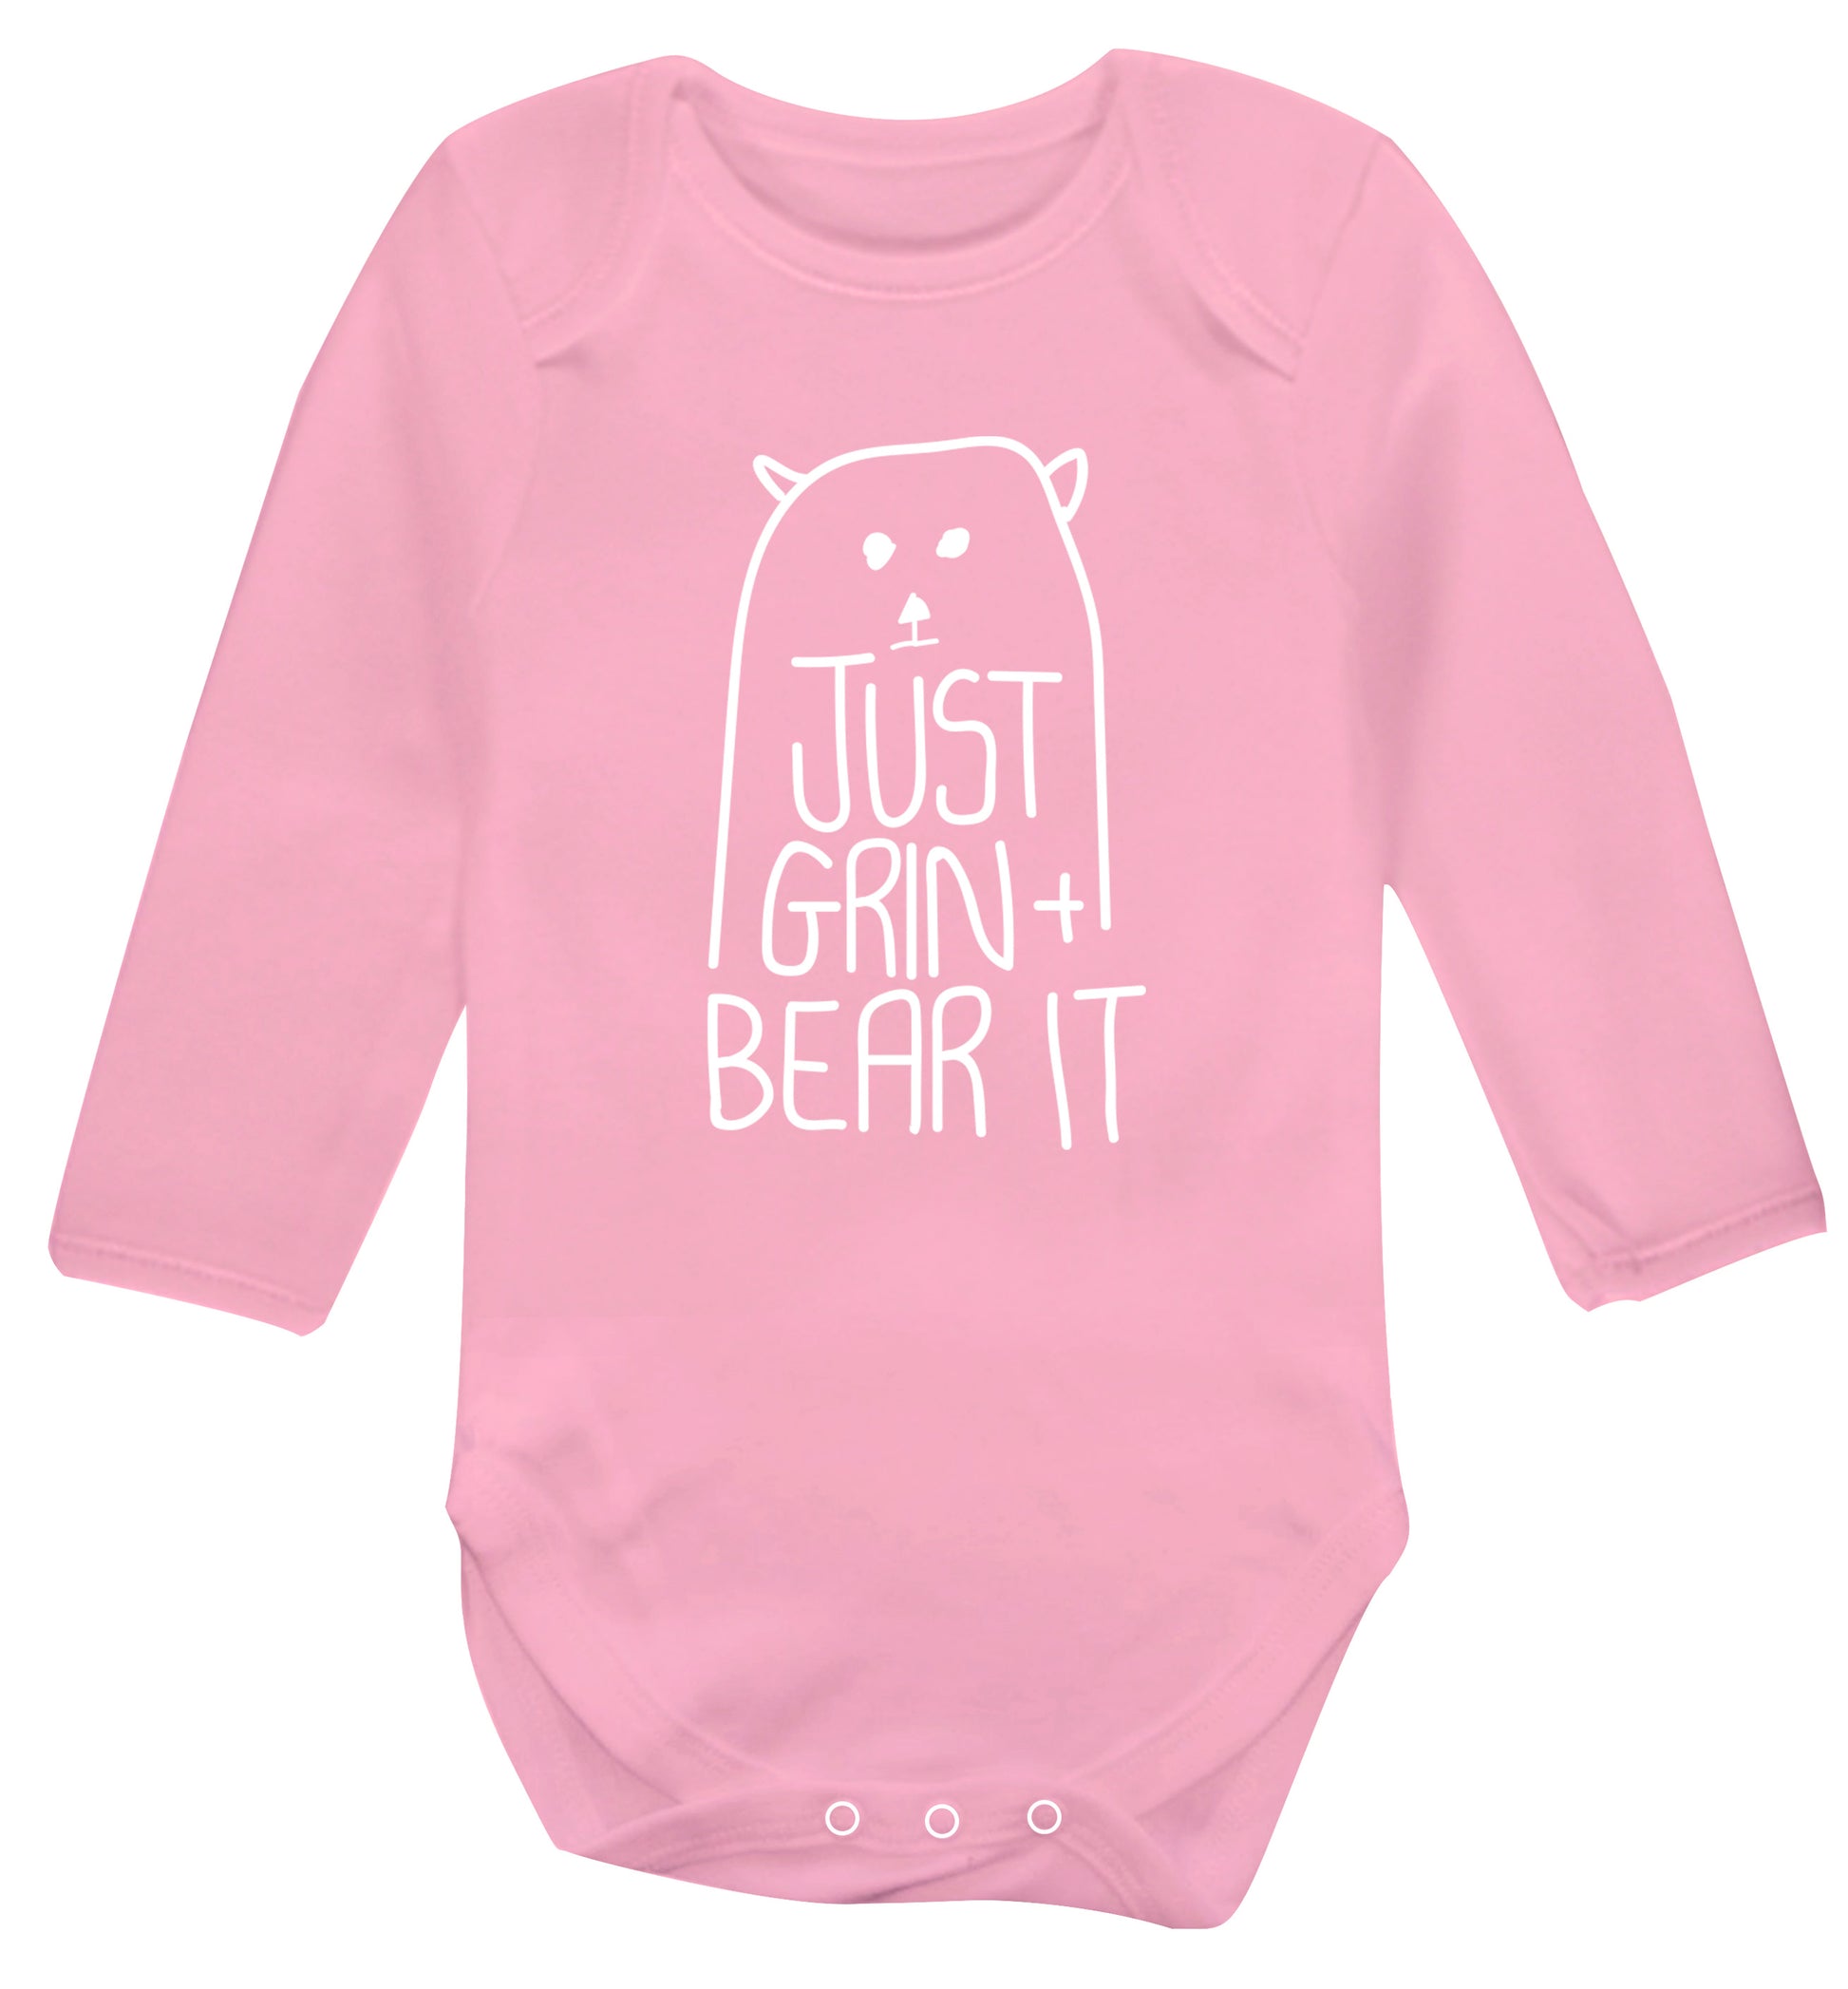 Just grin and bear it Baby Vest long sleeved pale pink 6-12 months